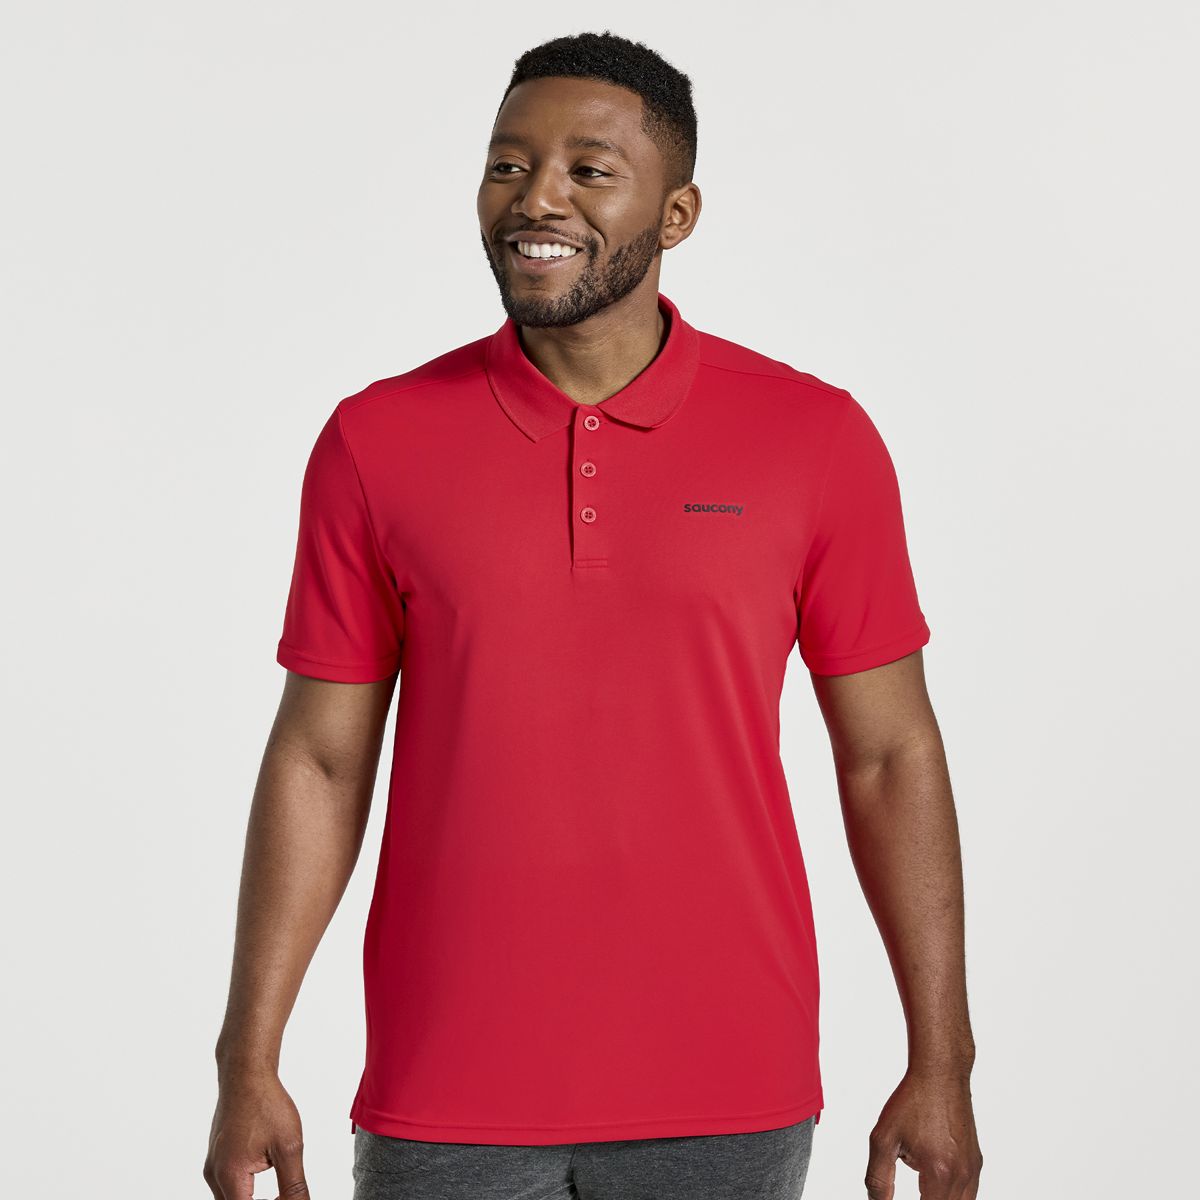 Saucony Polo Shirt, Red, dynamic